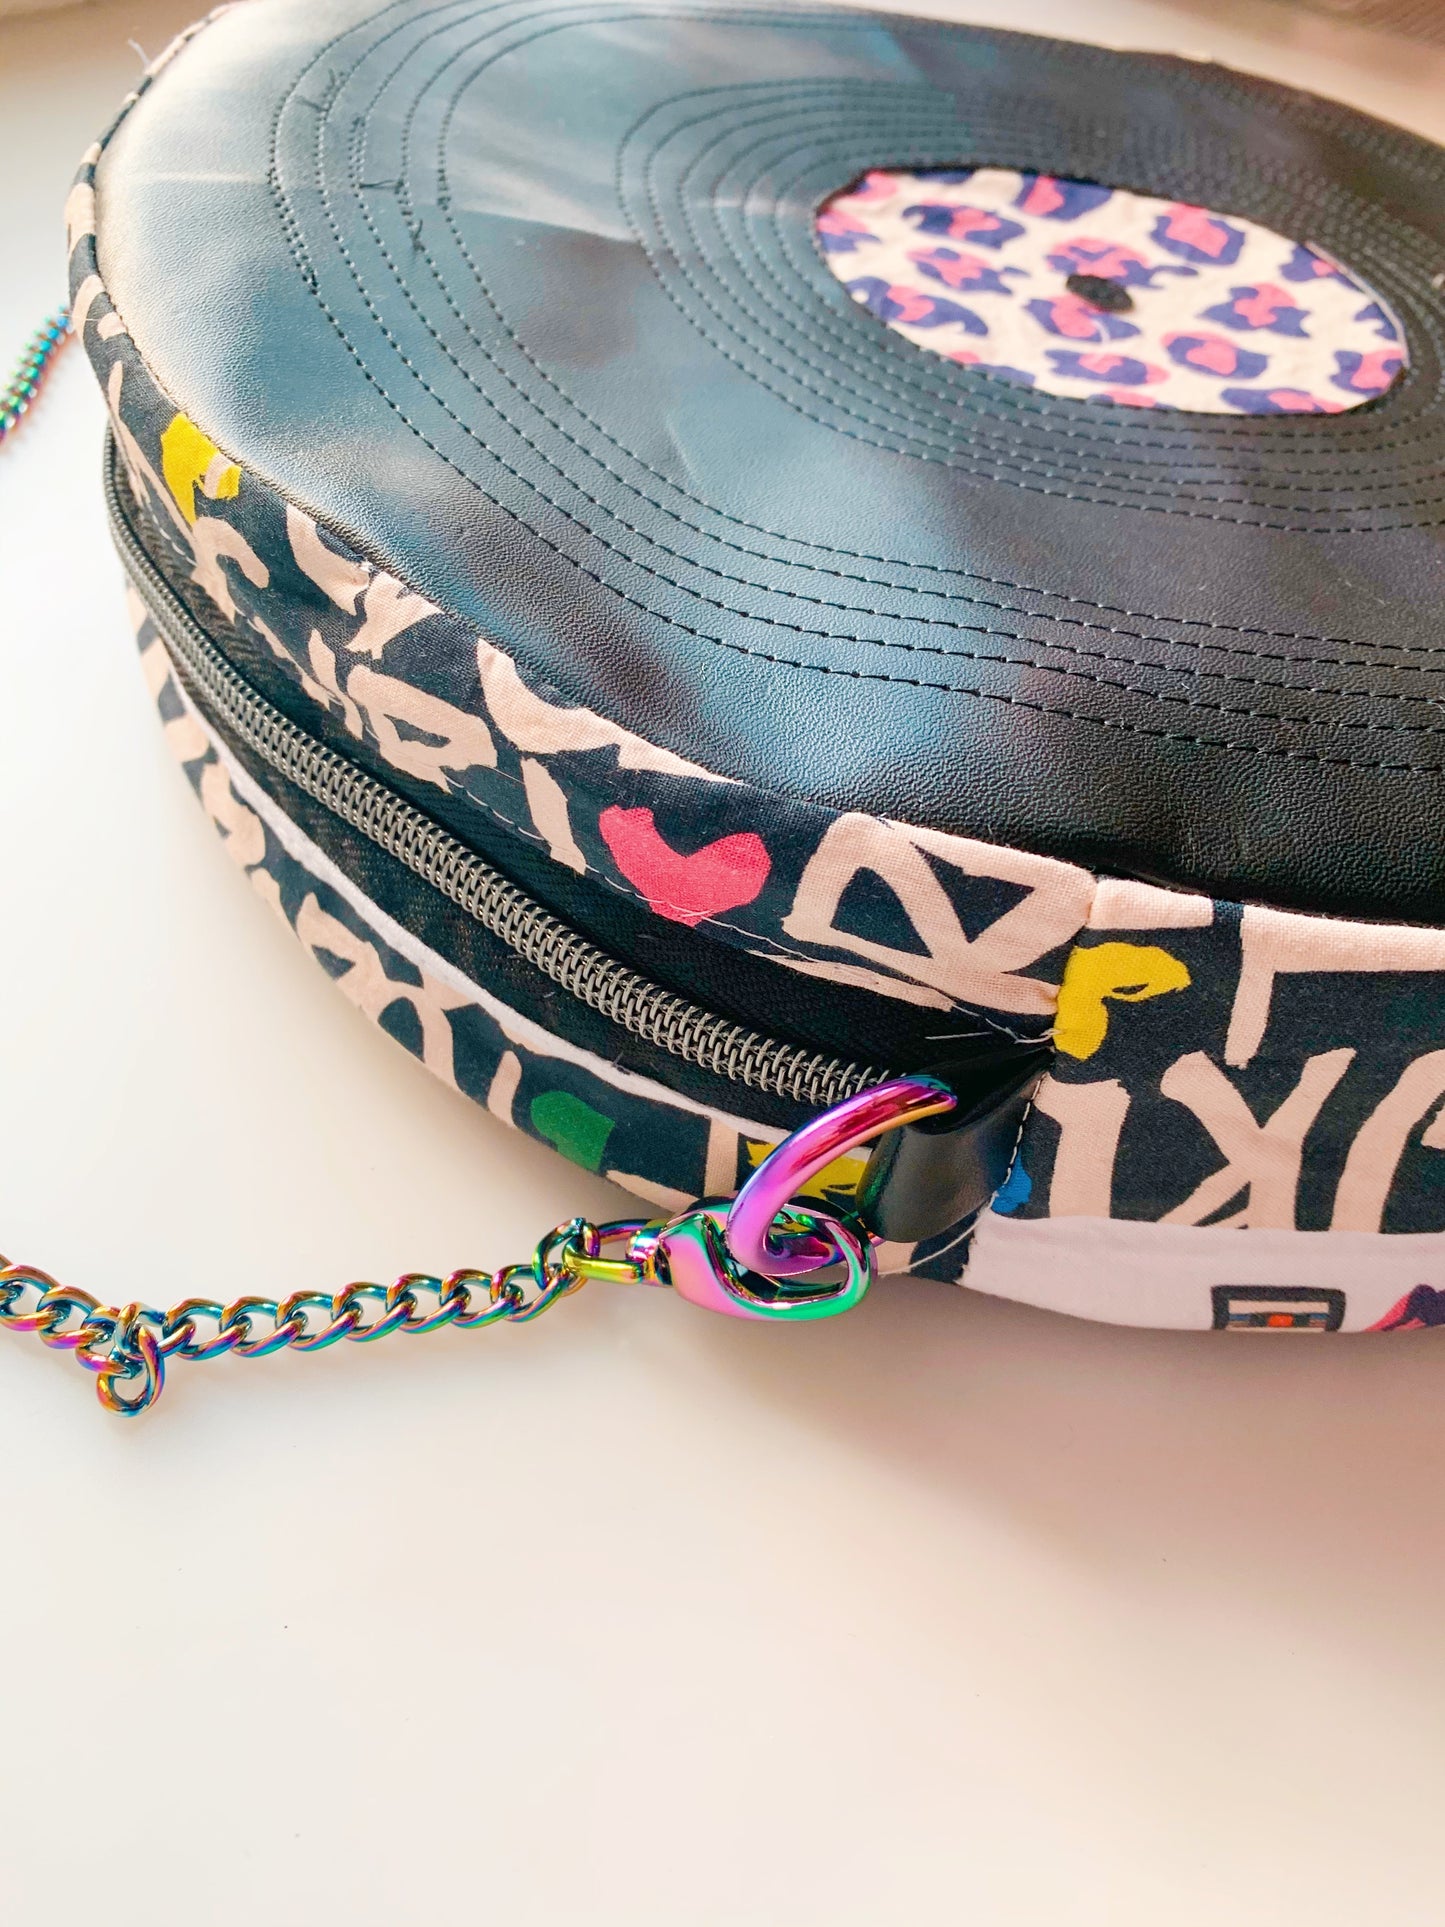 Vinyl Record Bag · A Vinyl Record Purse · Sewing on Cut Out + Keep